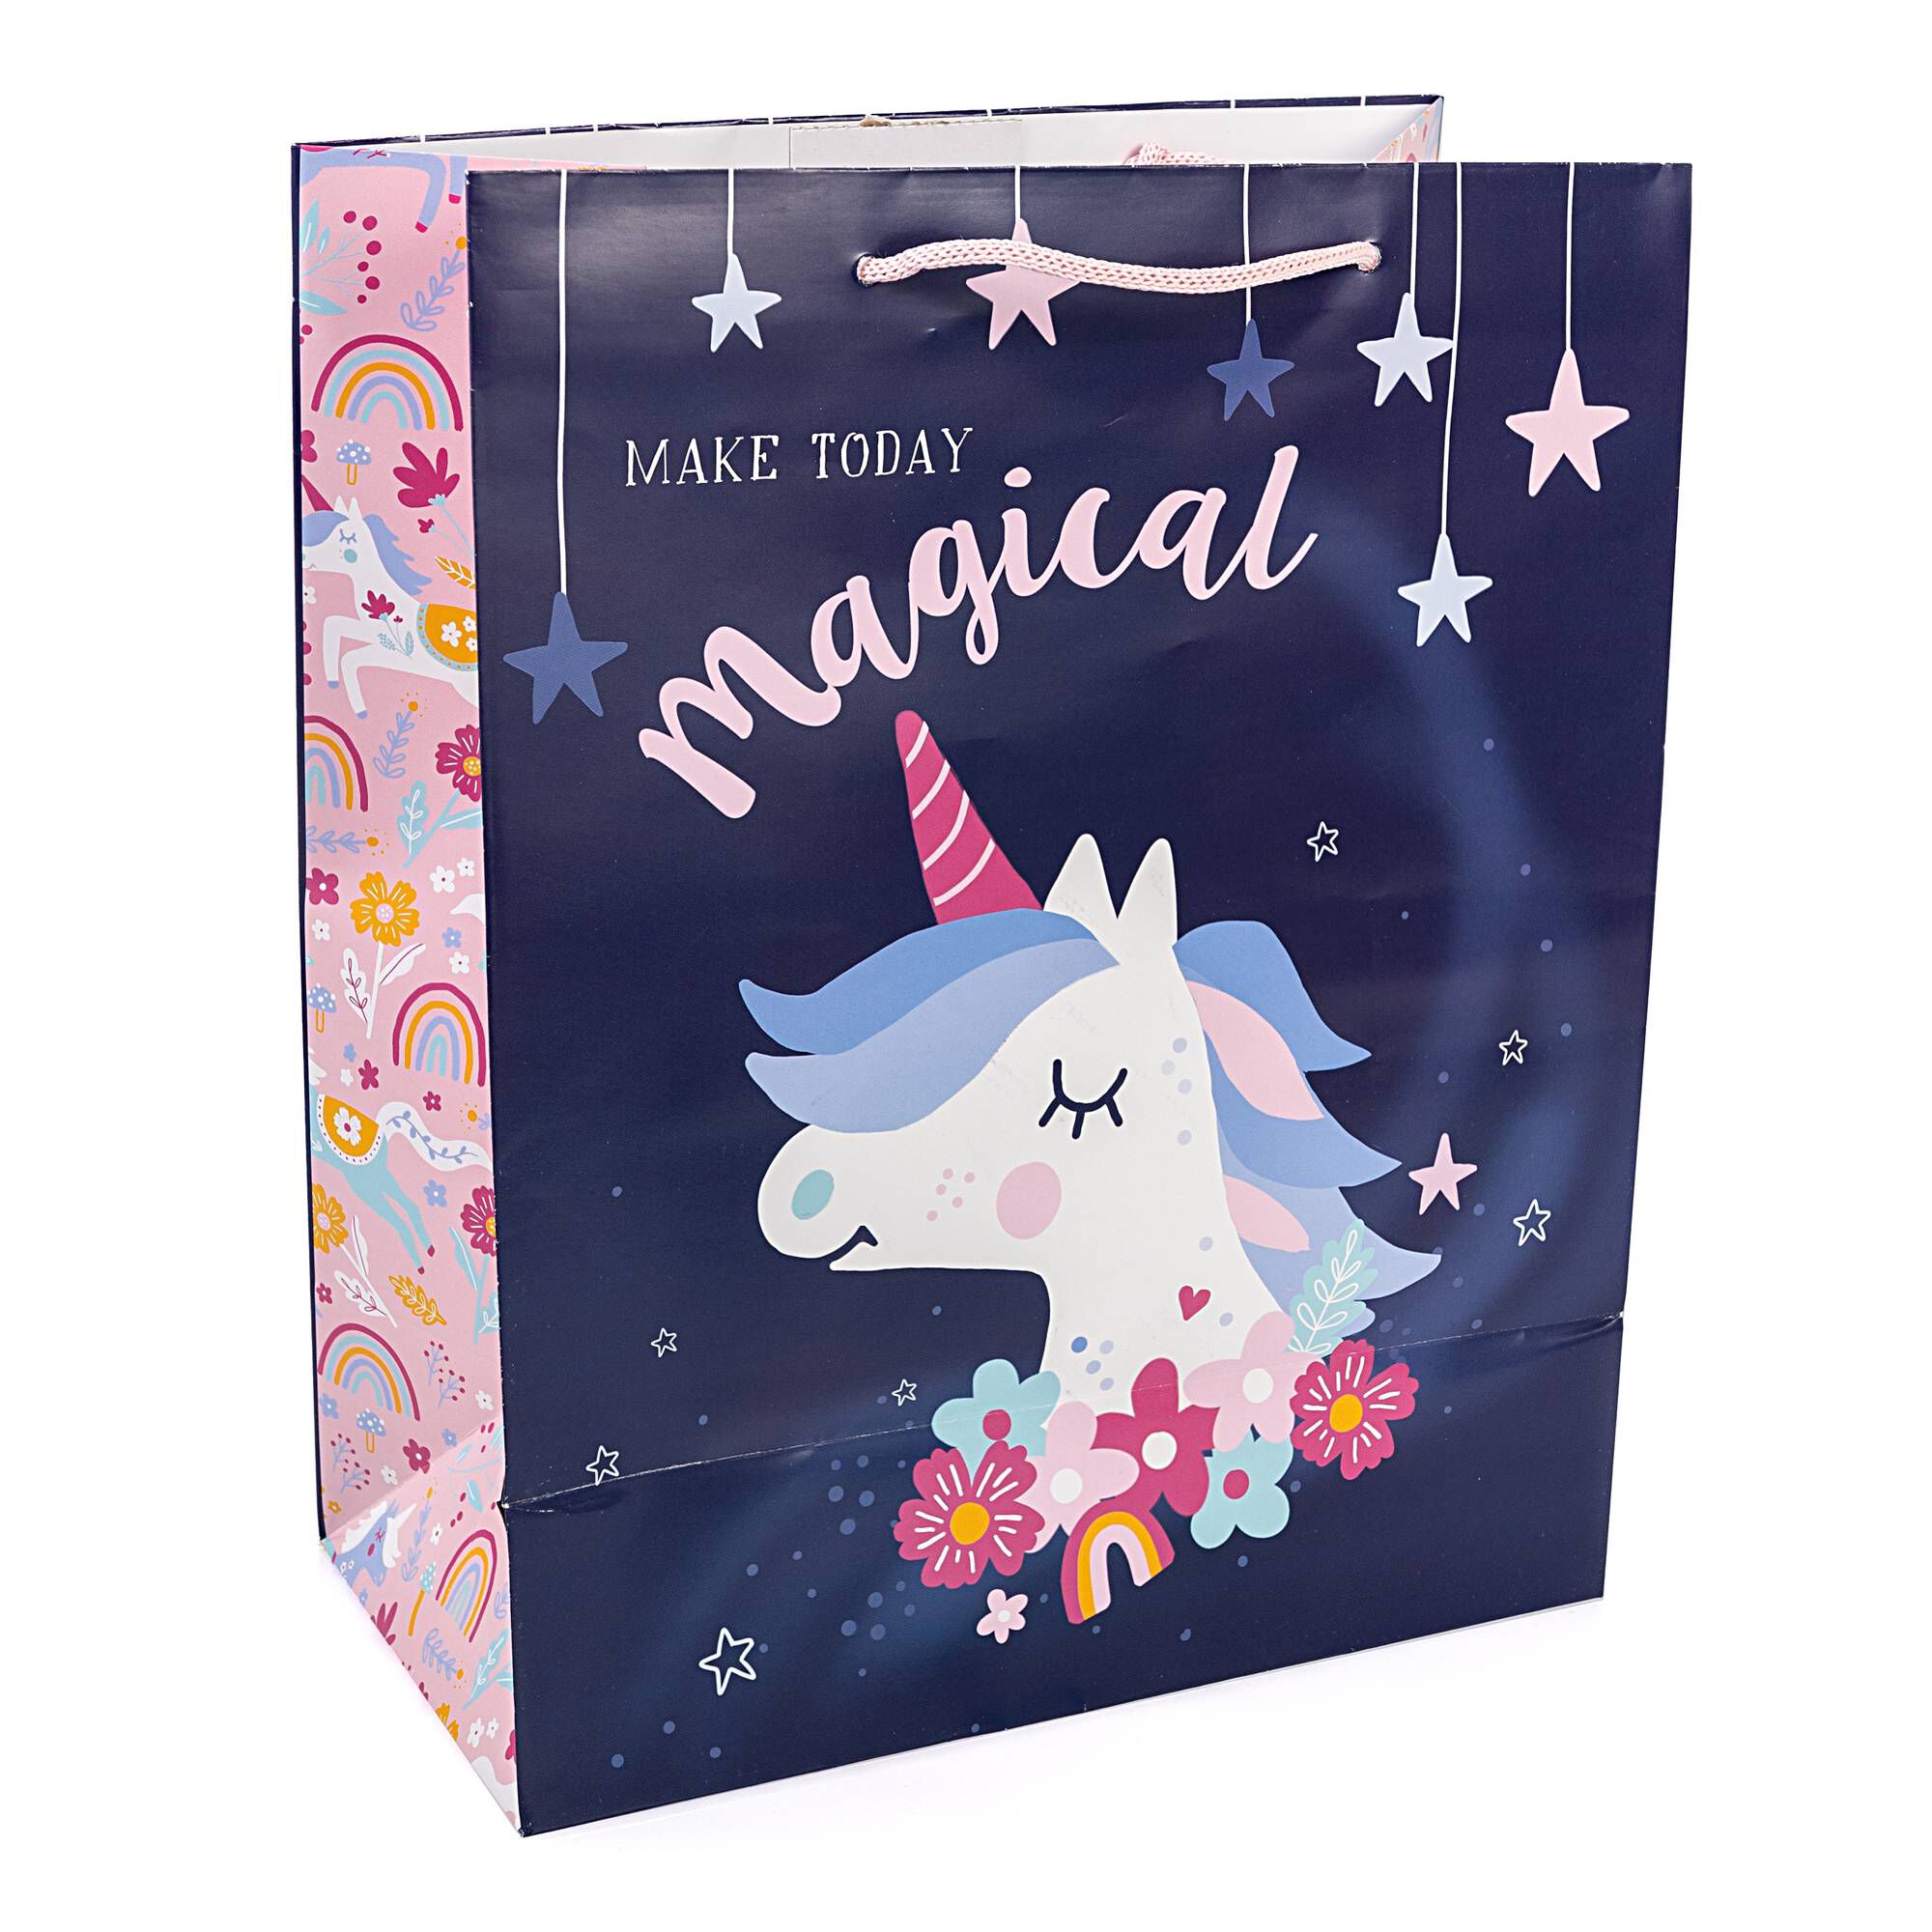 Vedic Invites Handled Unicorn Designer Paper Carry Bag, For Gifting,  Capacity: 2kg at Rs 13 in Mathura